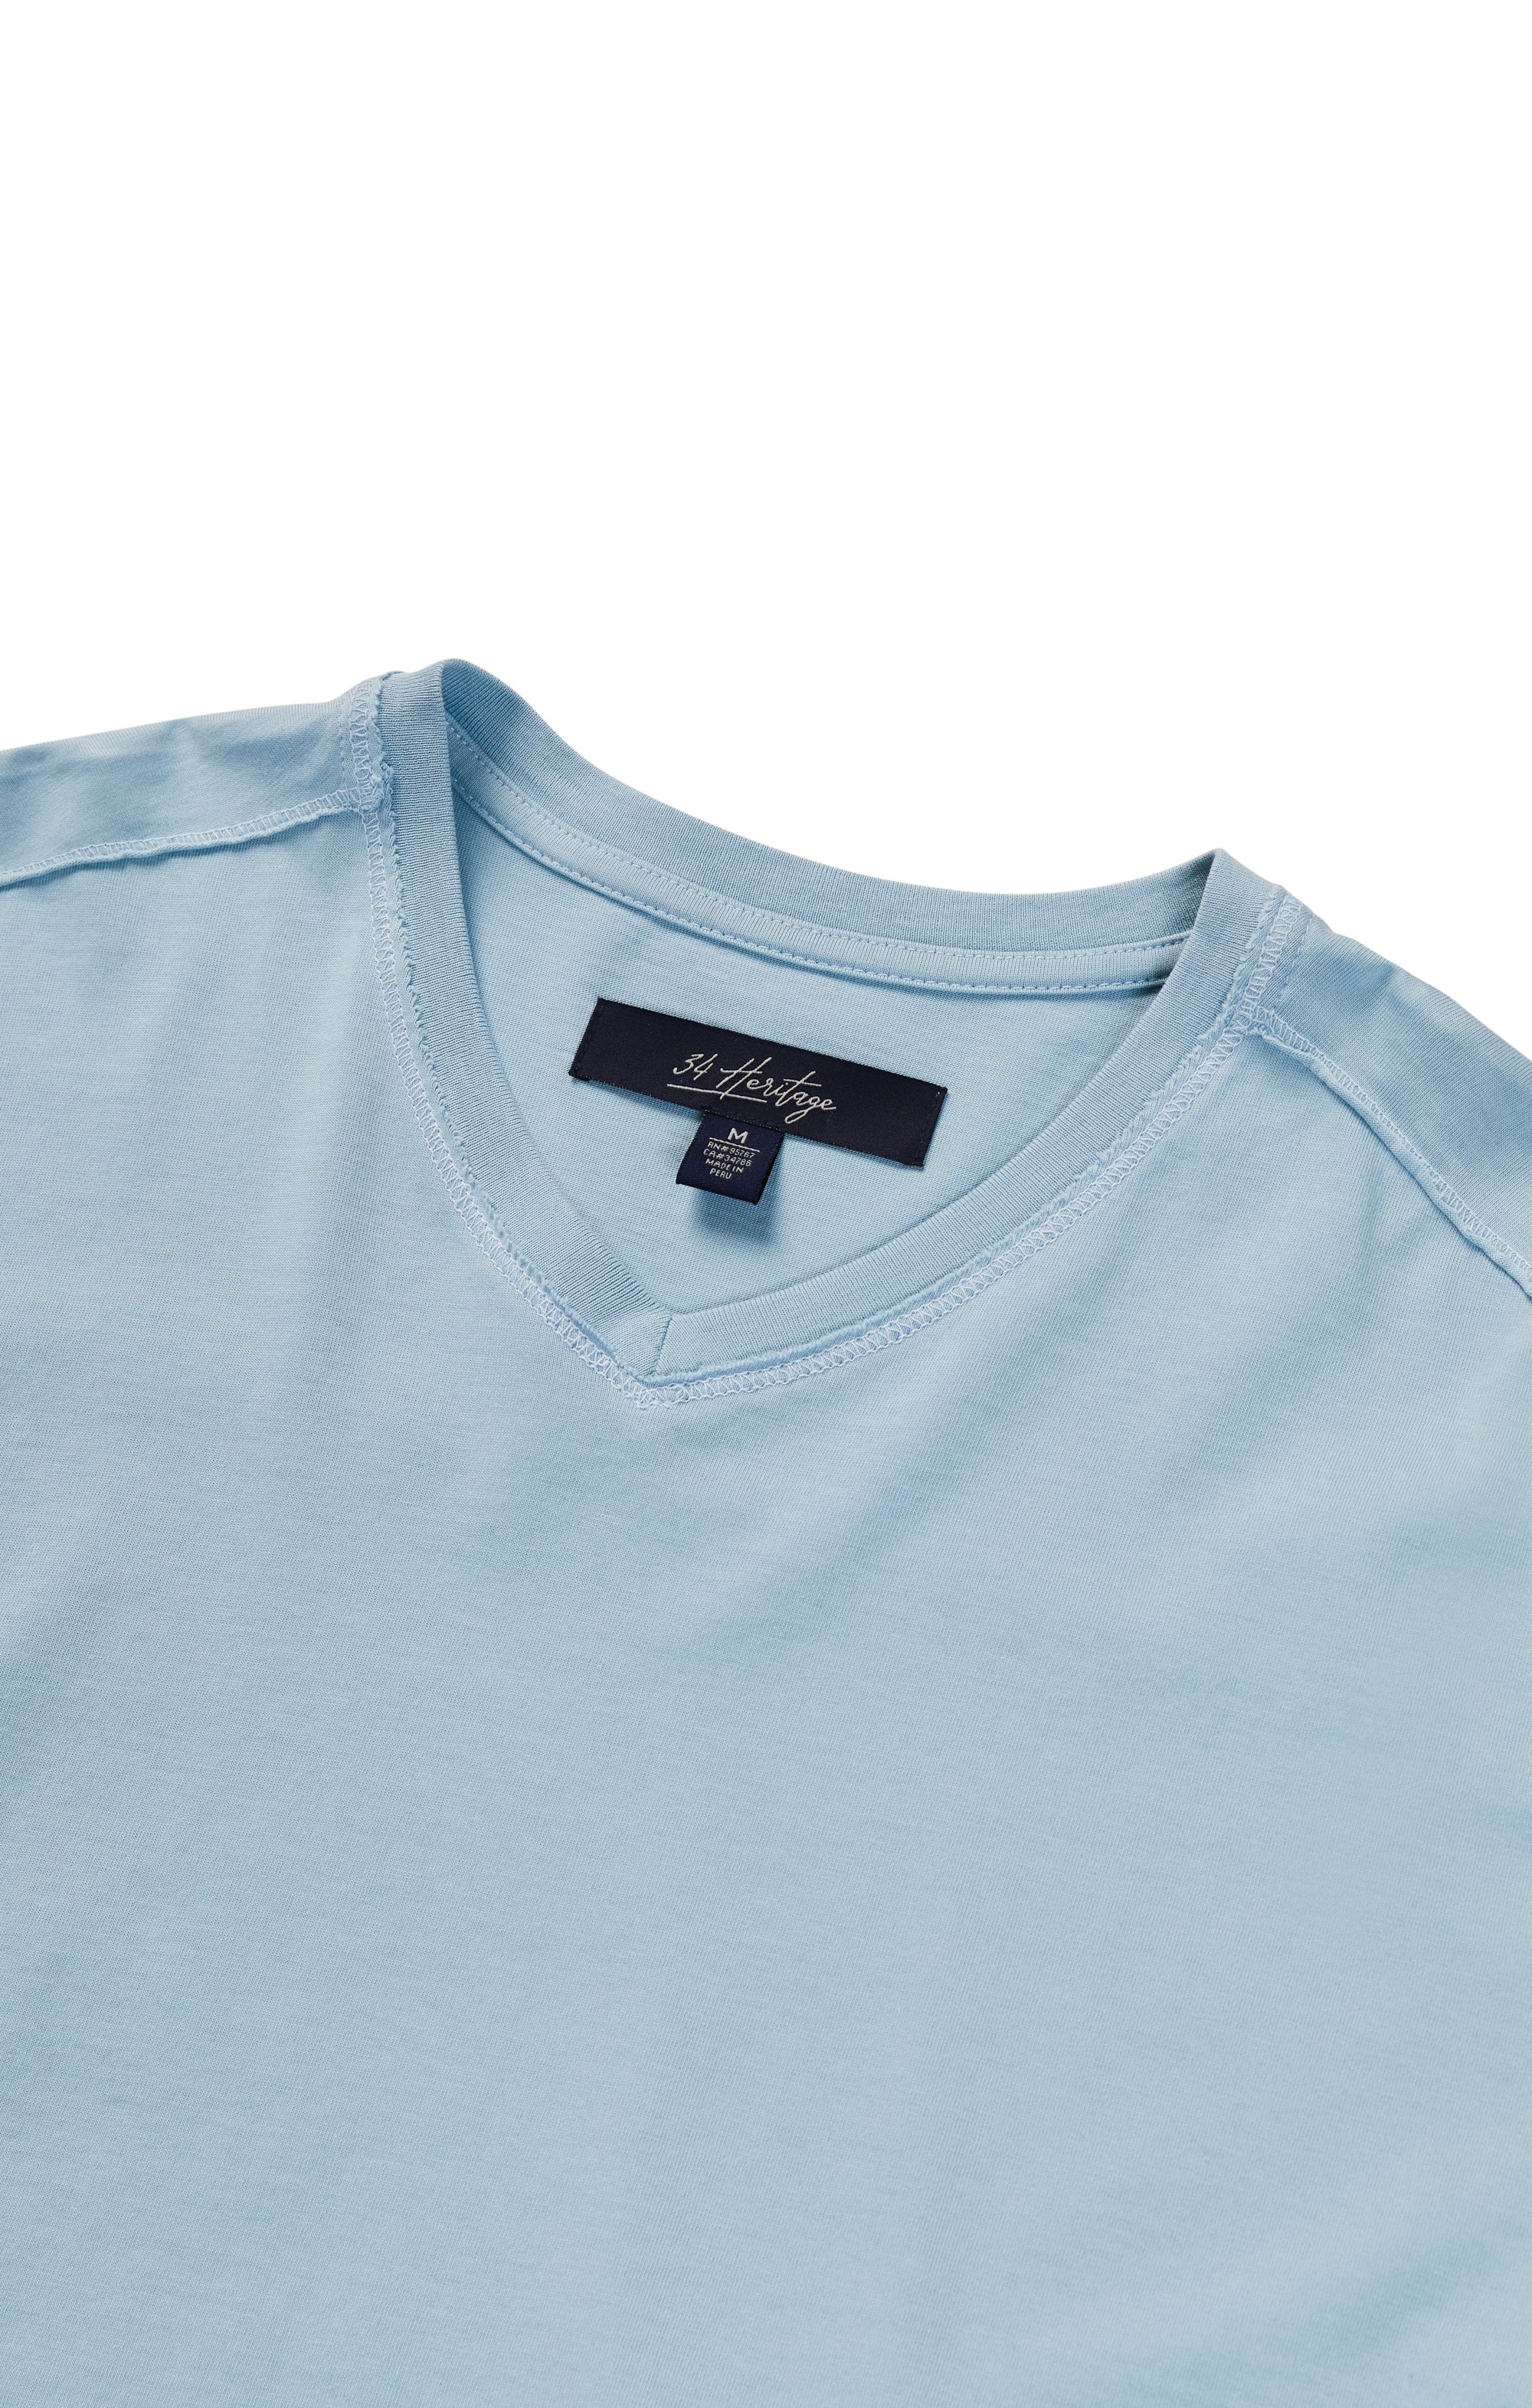 Deconstructed V-Neck T-Shirt in Forget-Me-Not Image 8